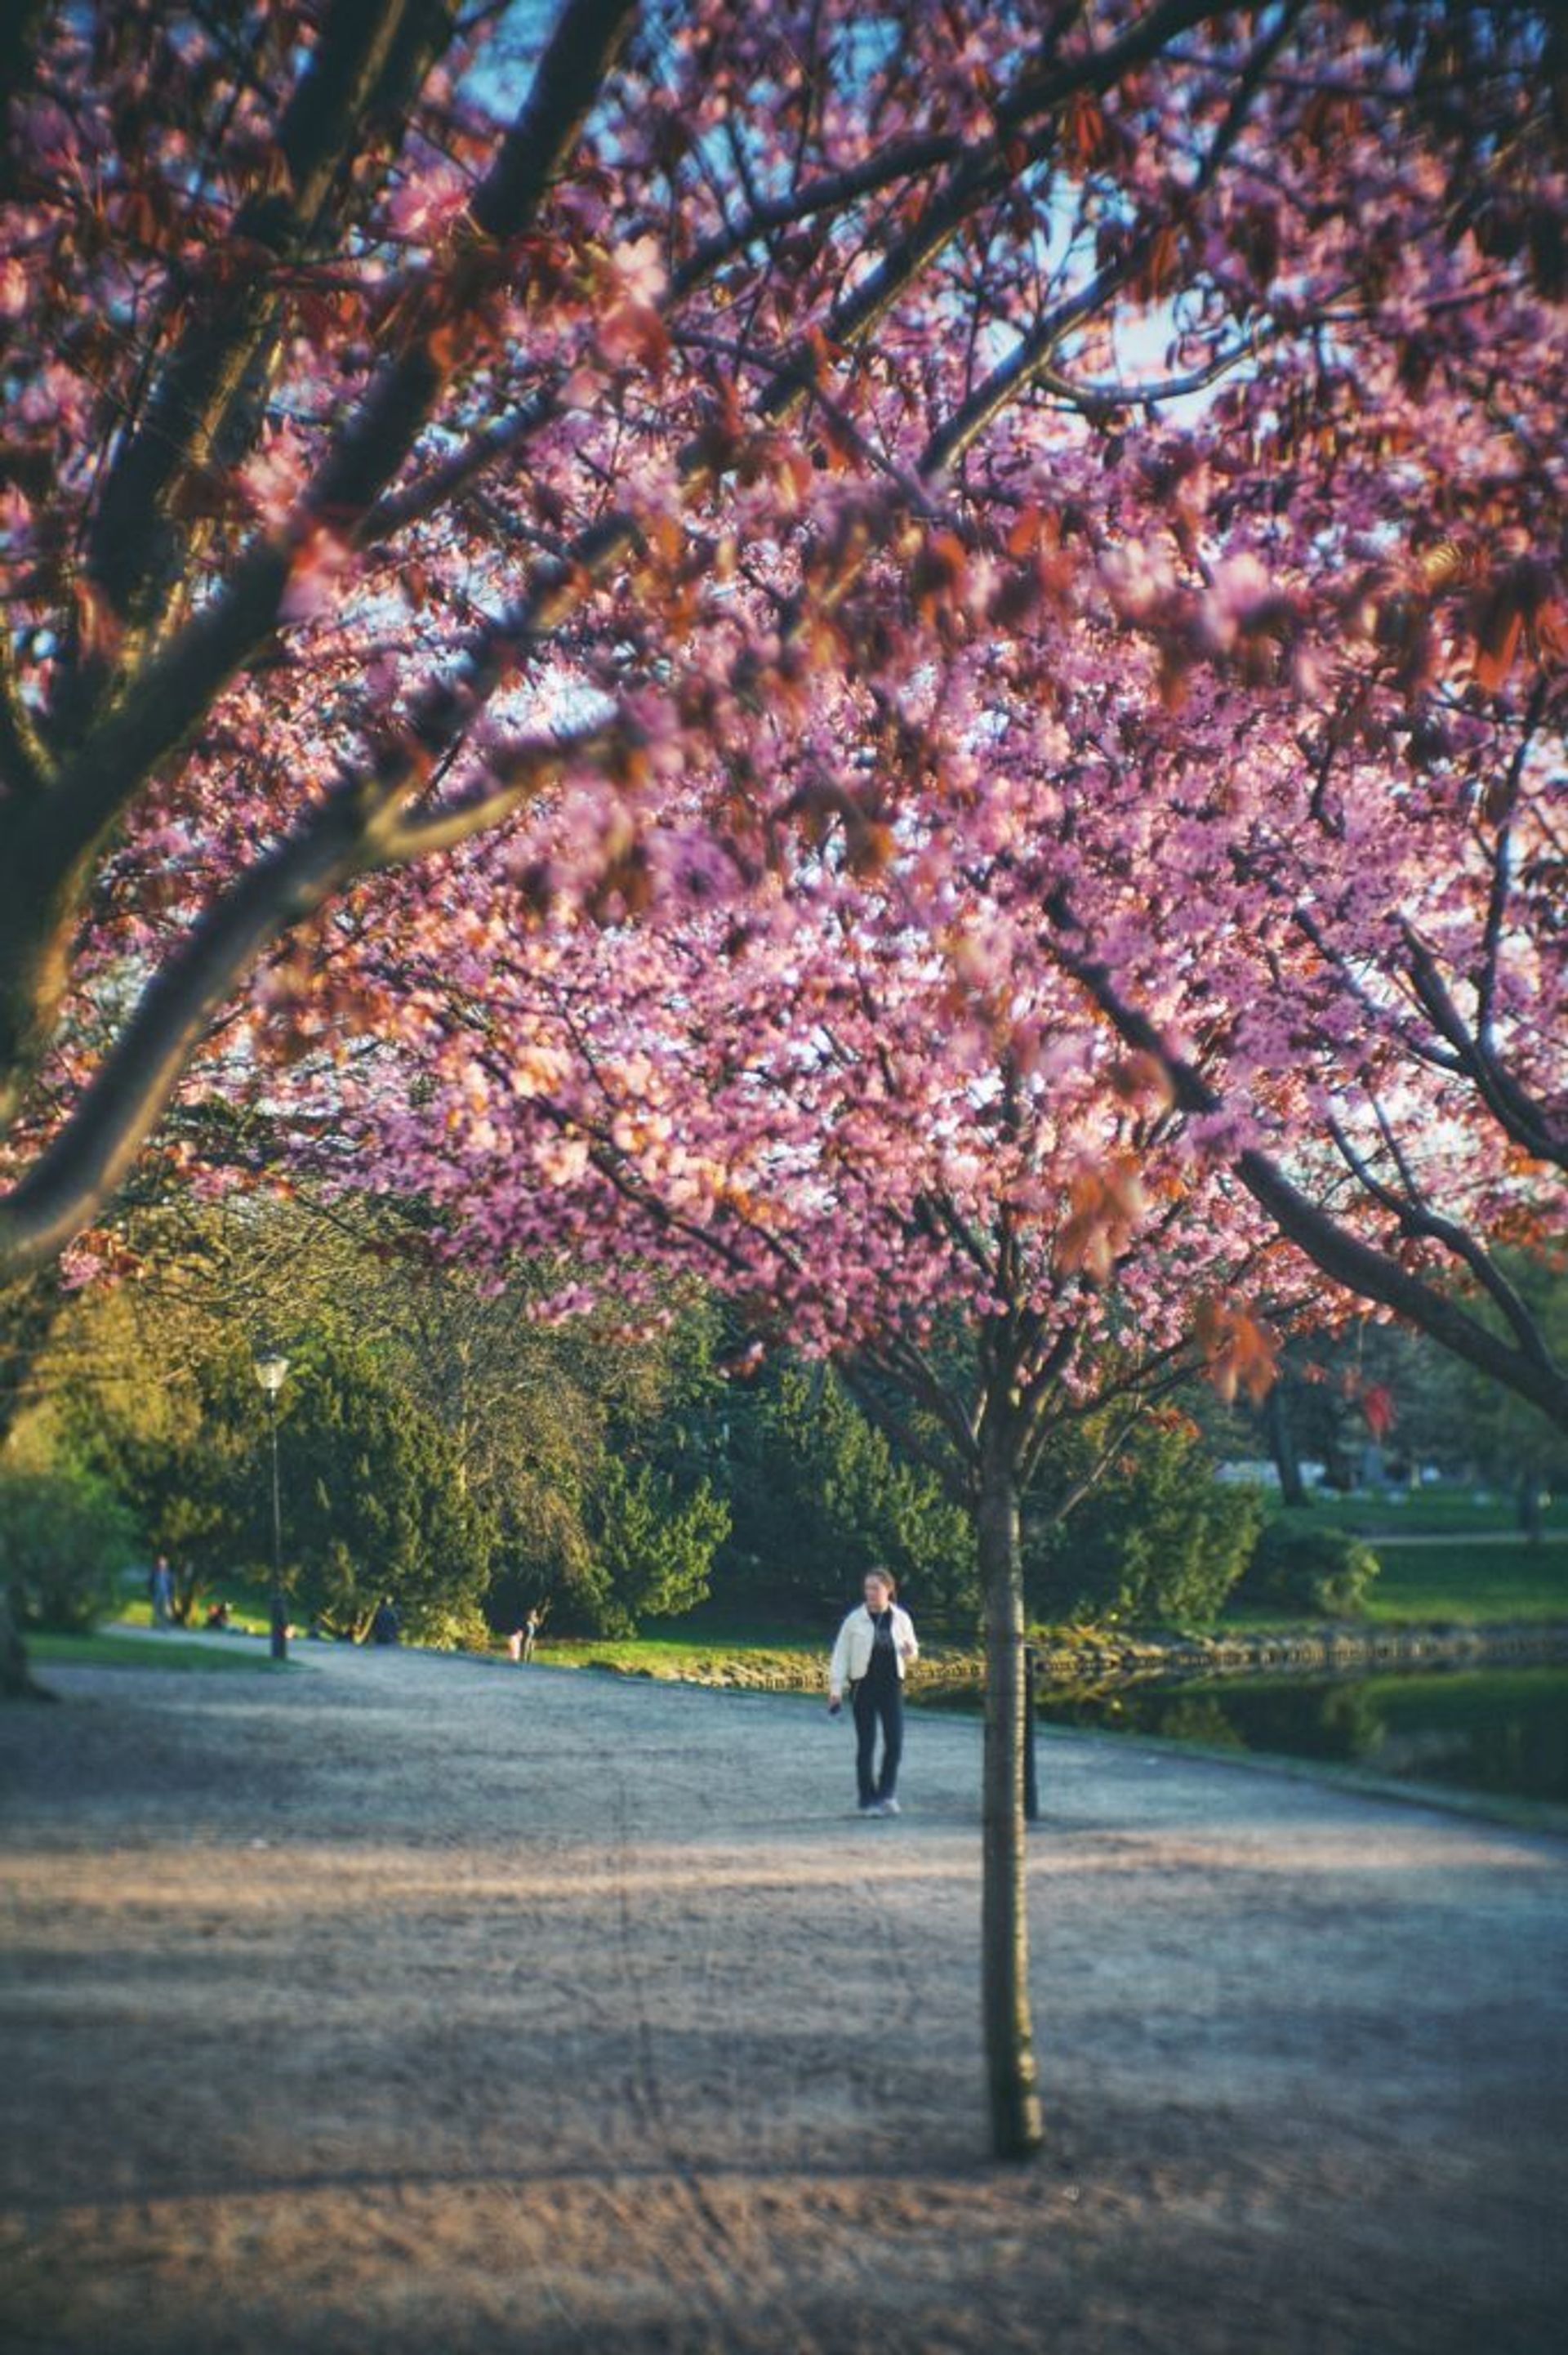 A person walking by a cherry blossom tree in a park.